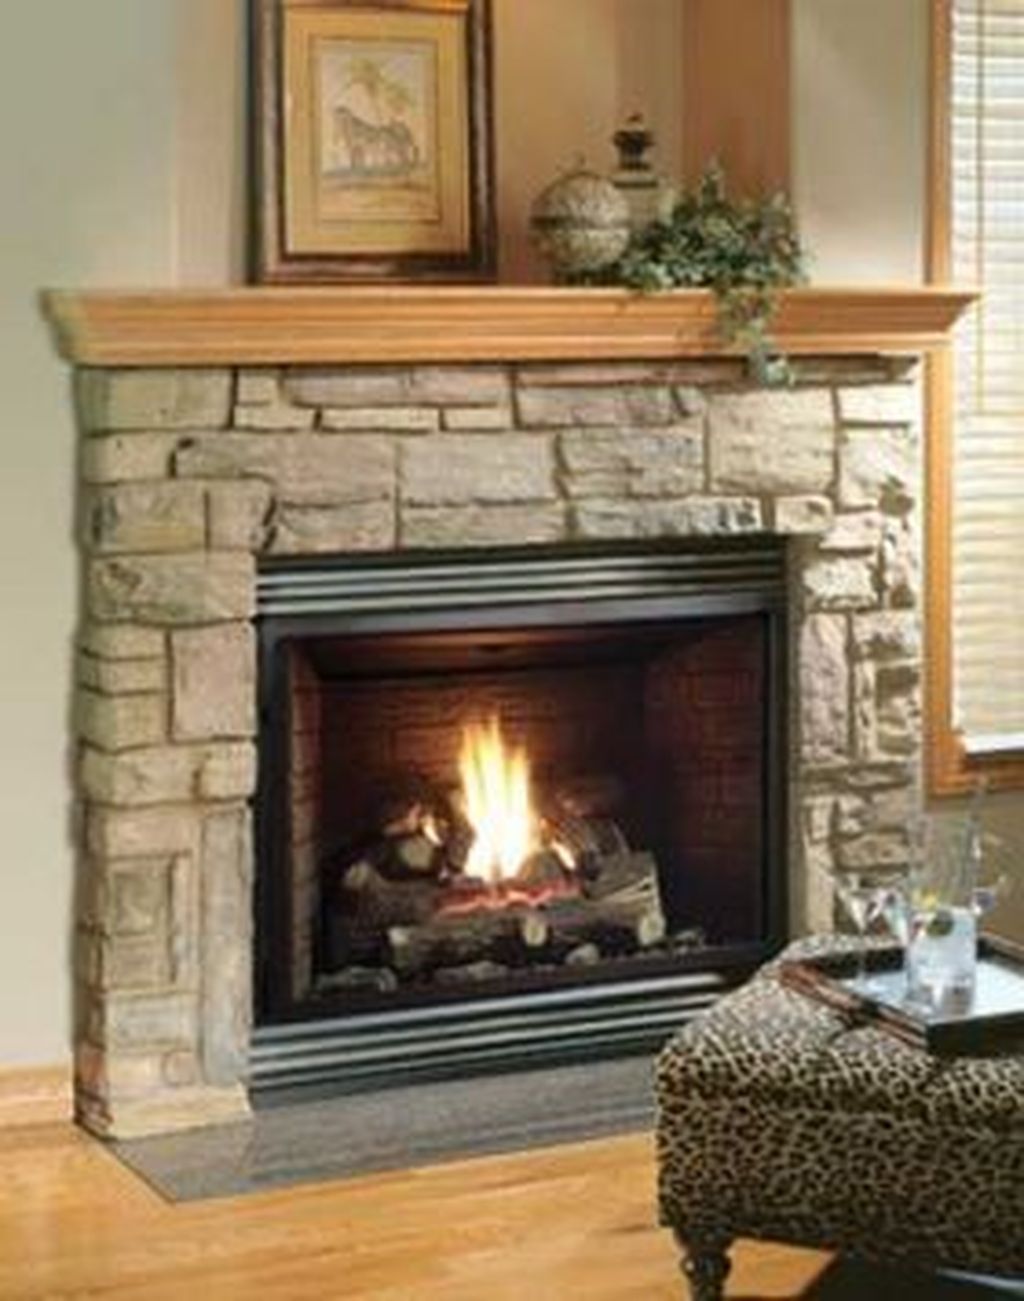 Duluth forge Ventless Gas Fireplace Elegant 42 Relaxing Living Rooms Design Ideas with Fireplaces